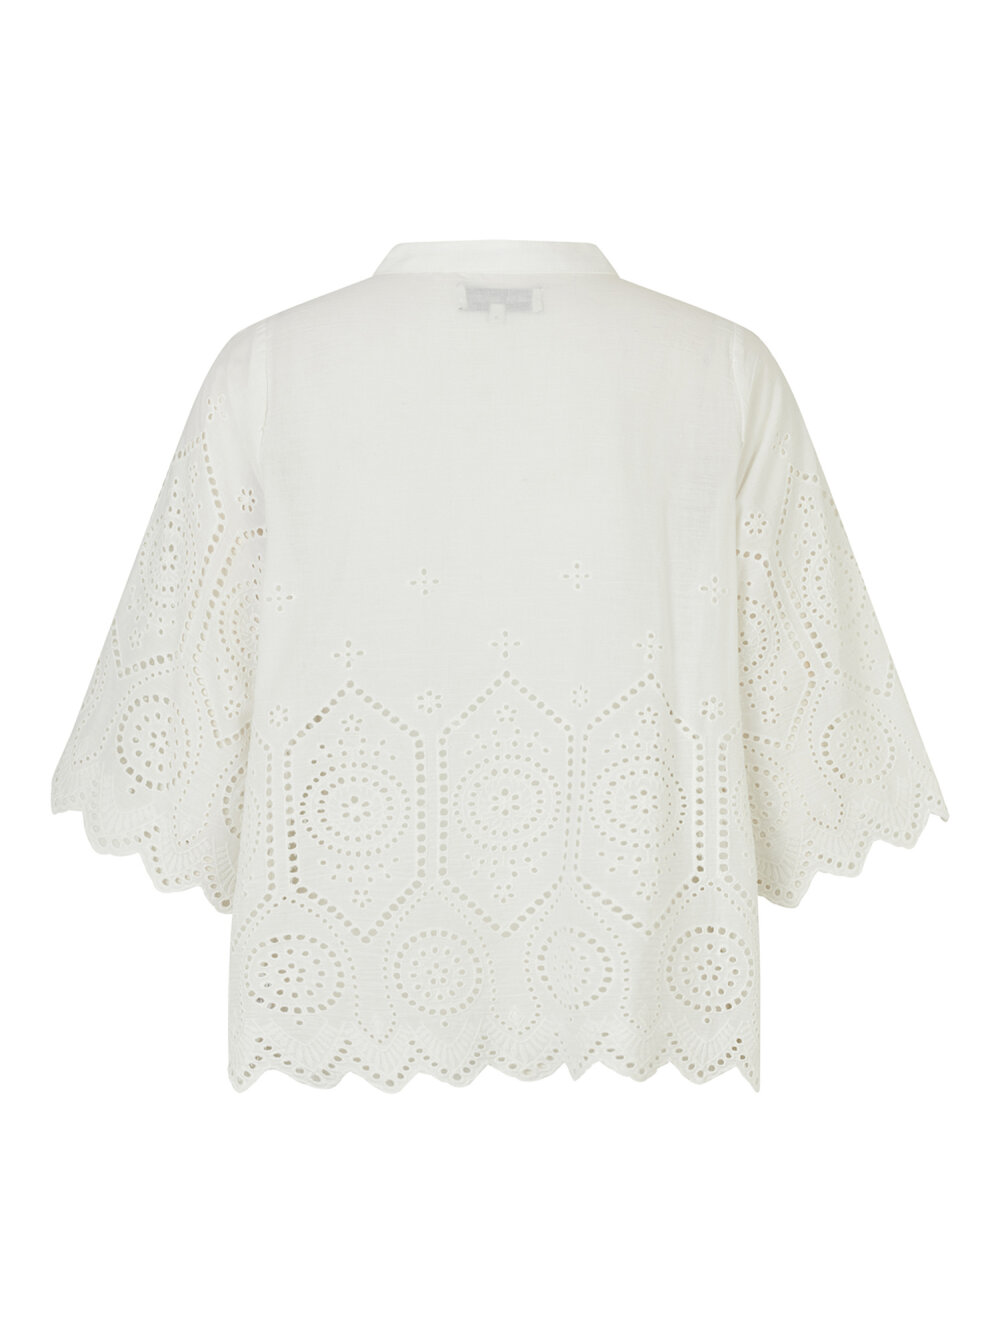 Lollys Laundry - LouiseLL Blouse SS